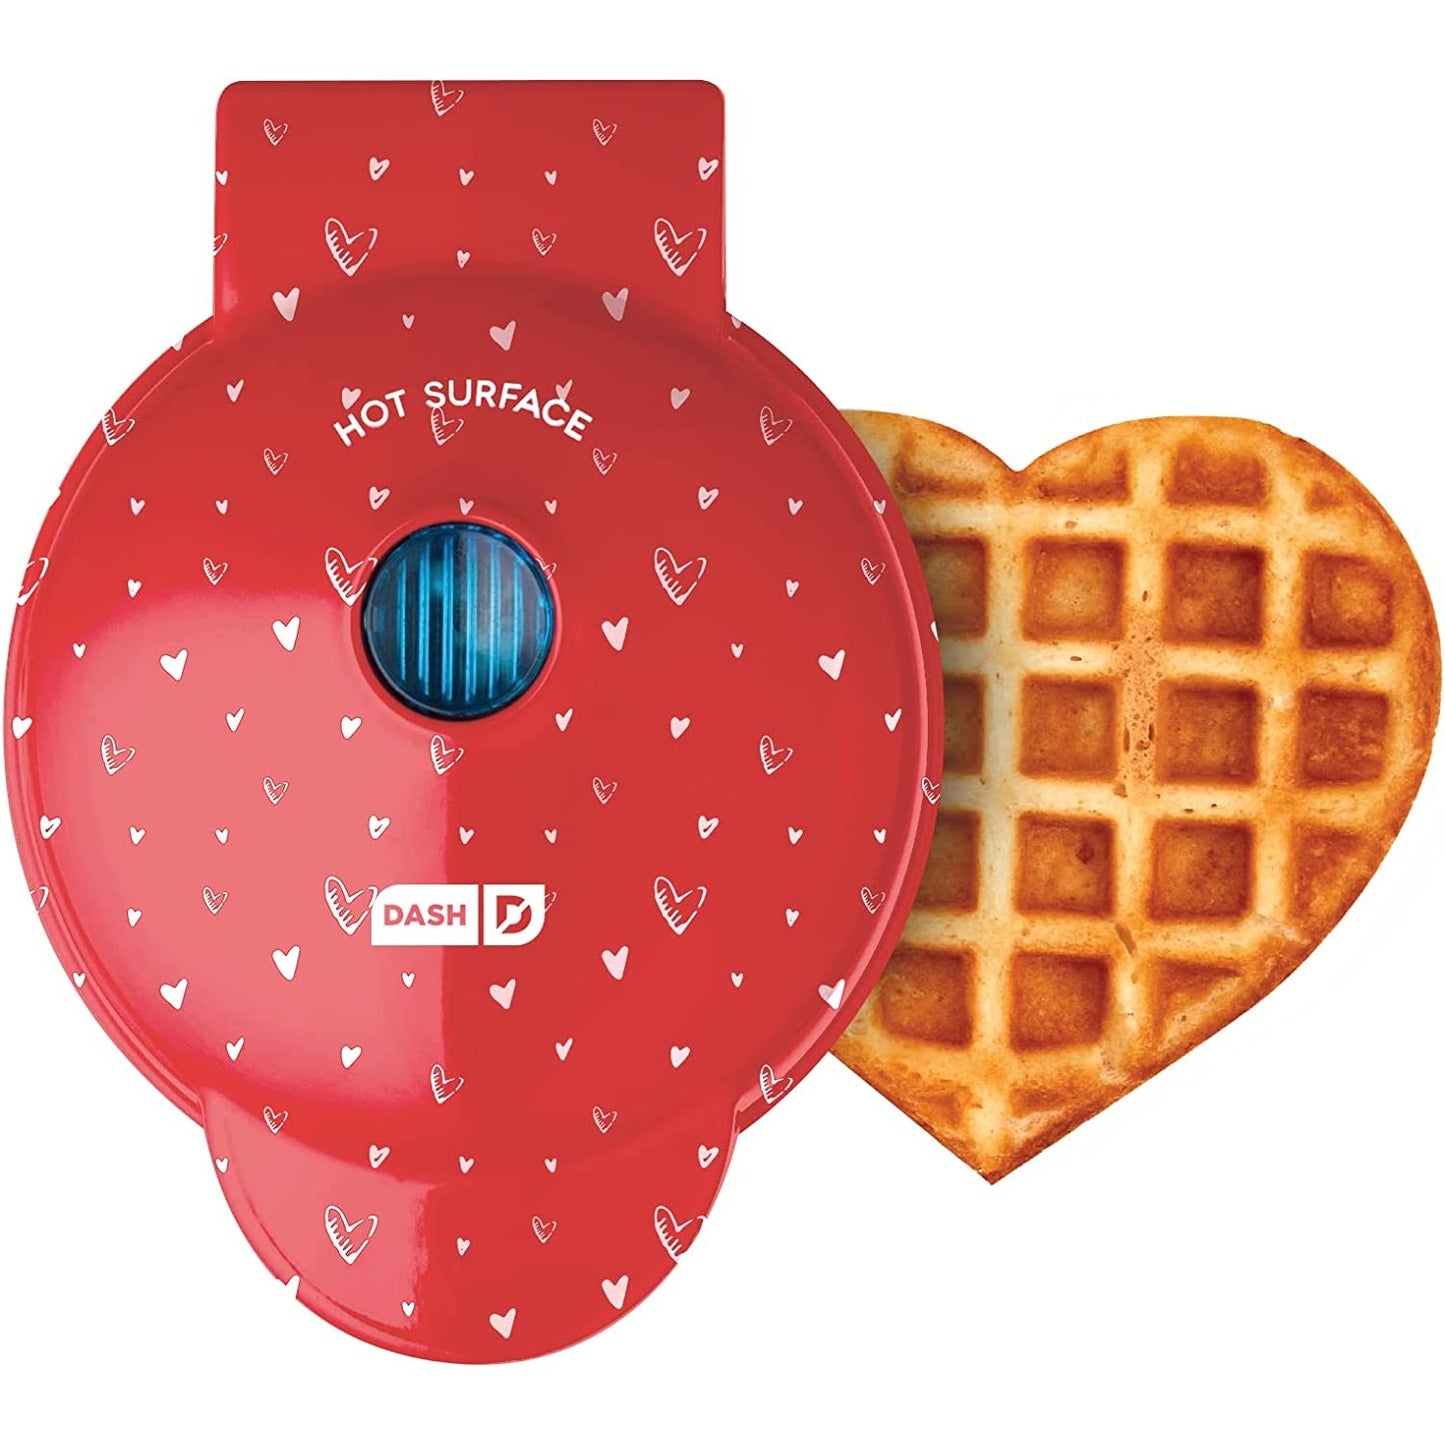 A red colored heart shaped waffle maker with a cooked heart shaped waffle next to the machine.